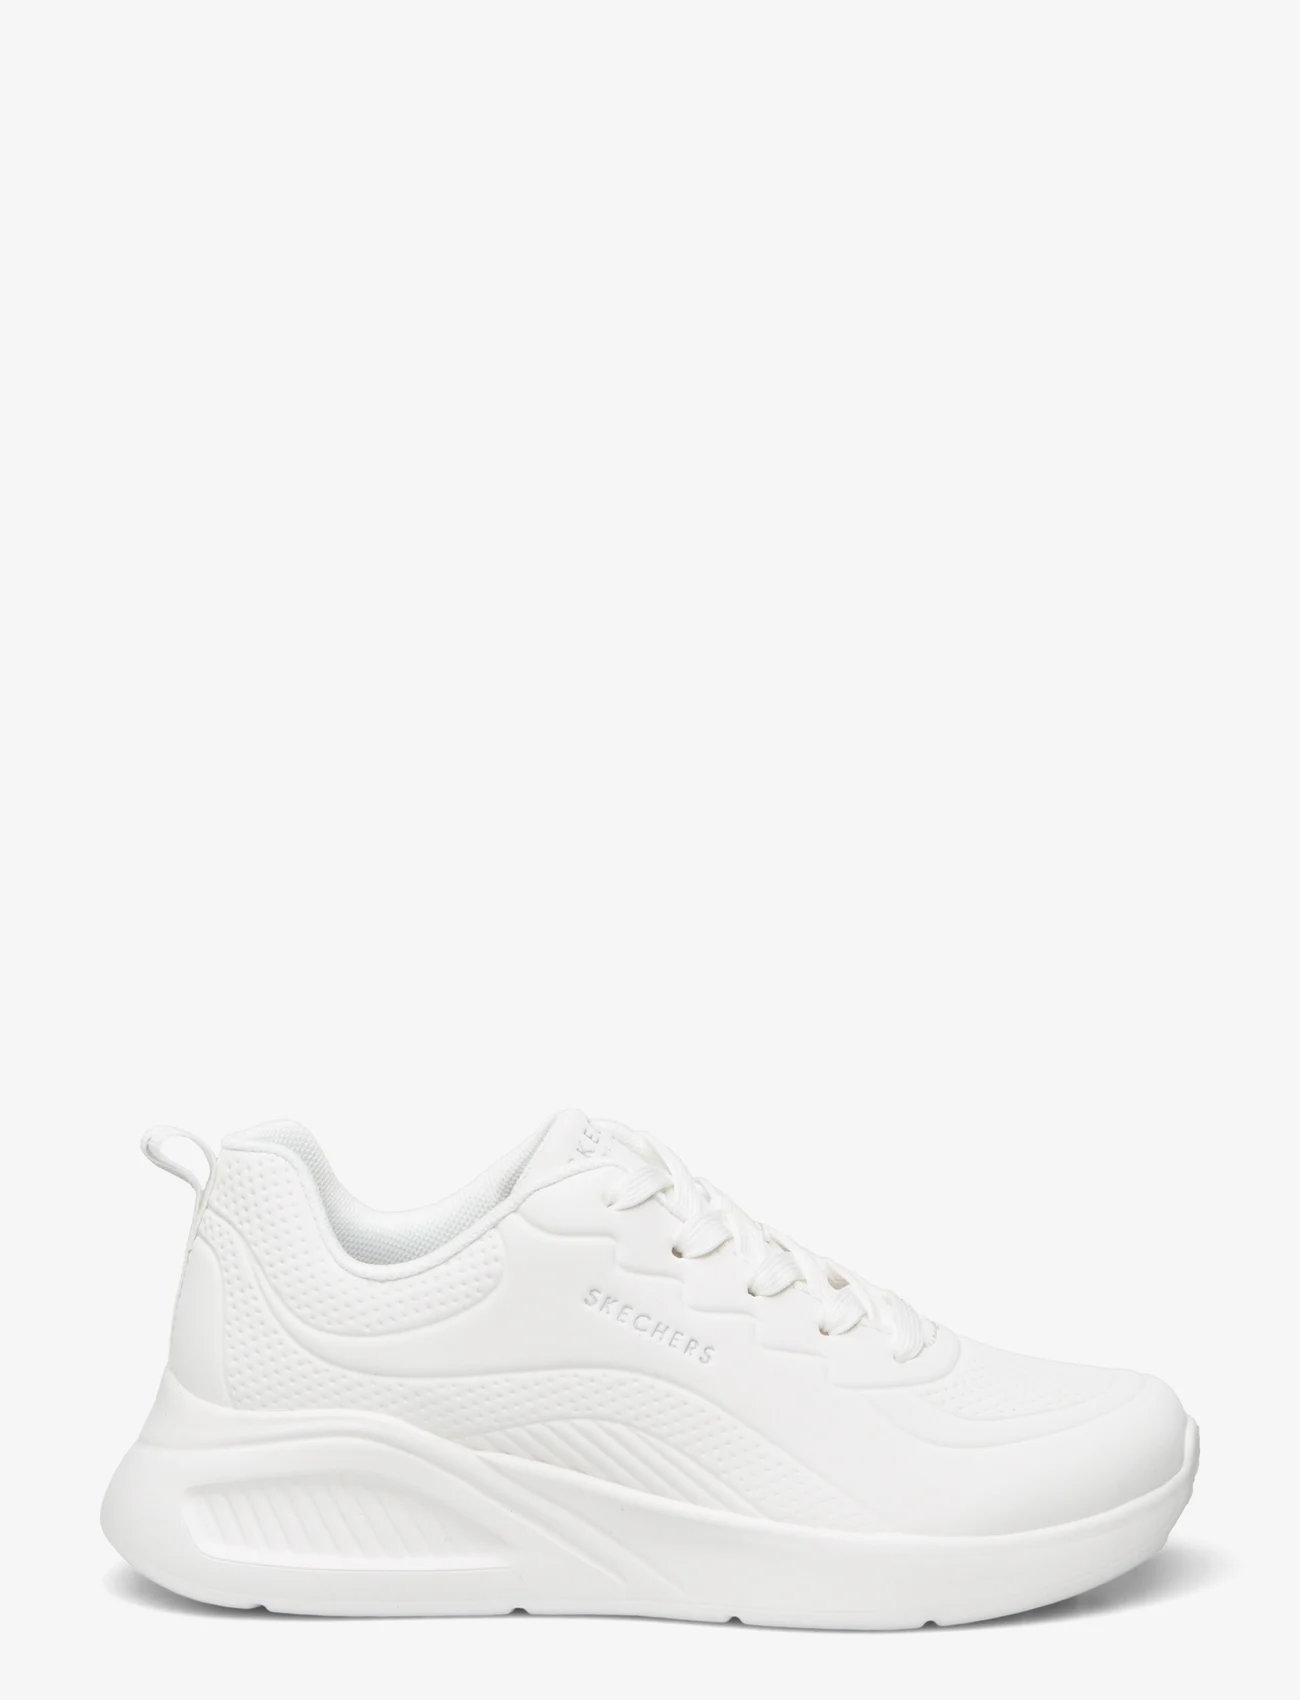 Skechers - Womens Uno Lite - Lighter One - low top sneakers - wht white - 1